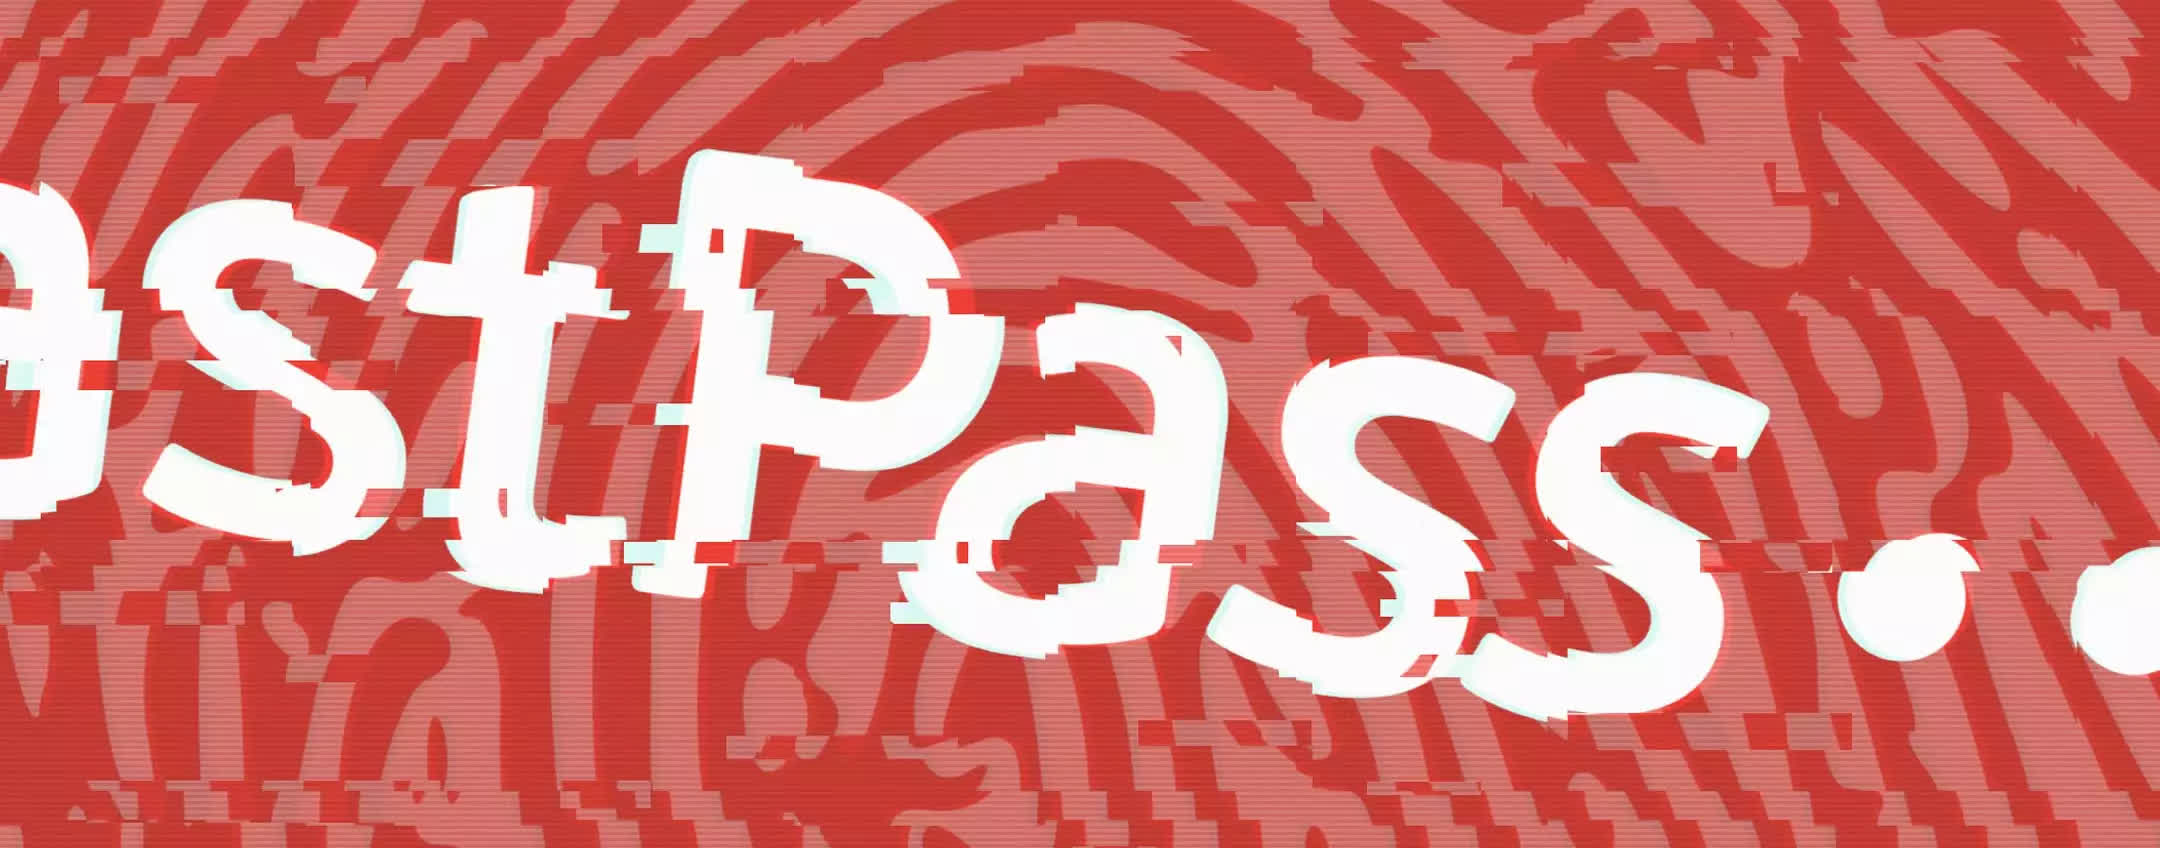 LastPass breach: it's worse than initially thought